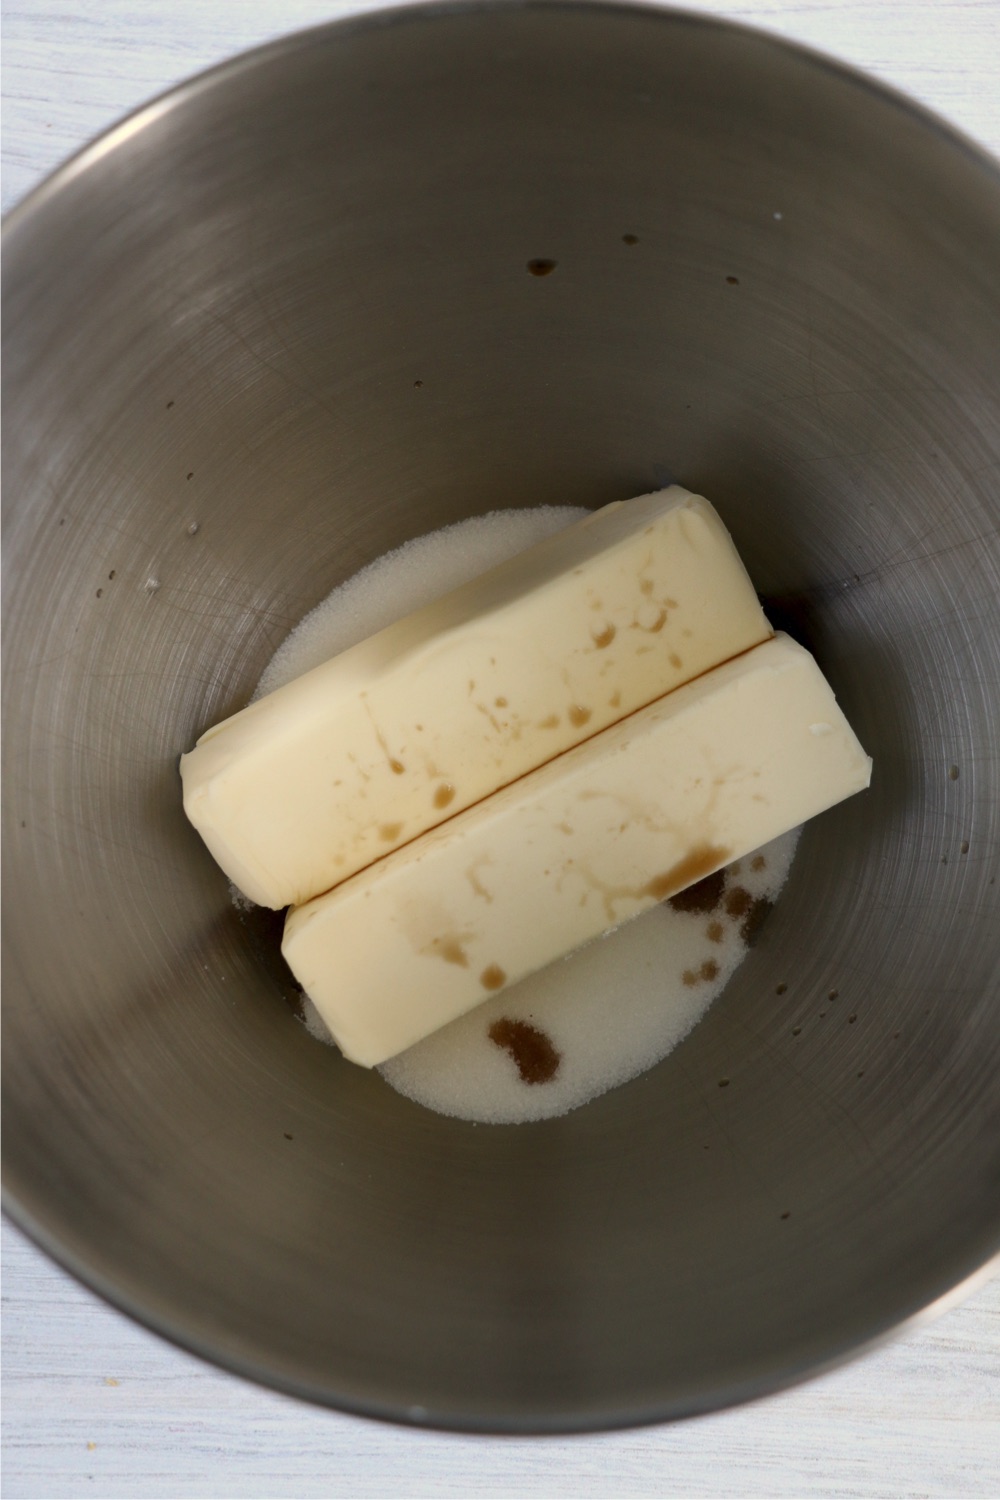 Butter, milk and vanilla in a mixing bowl